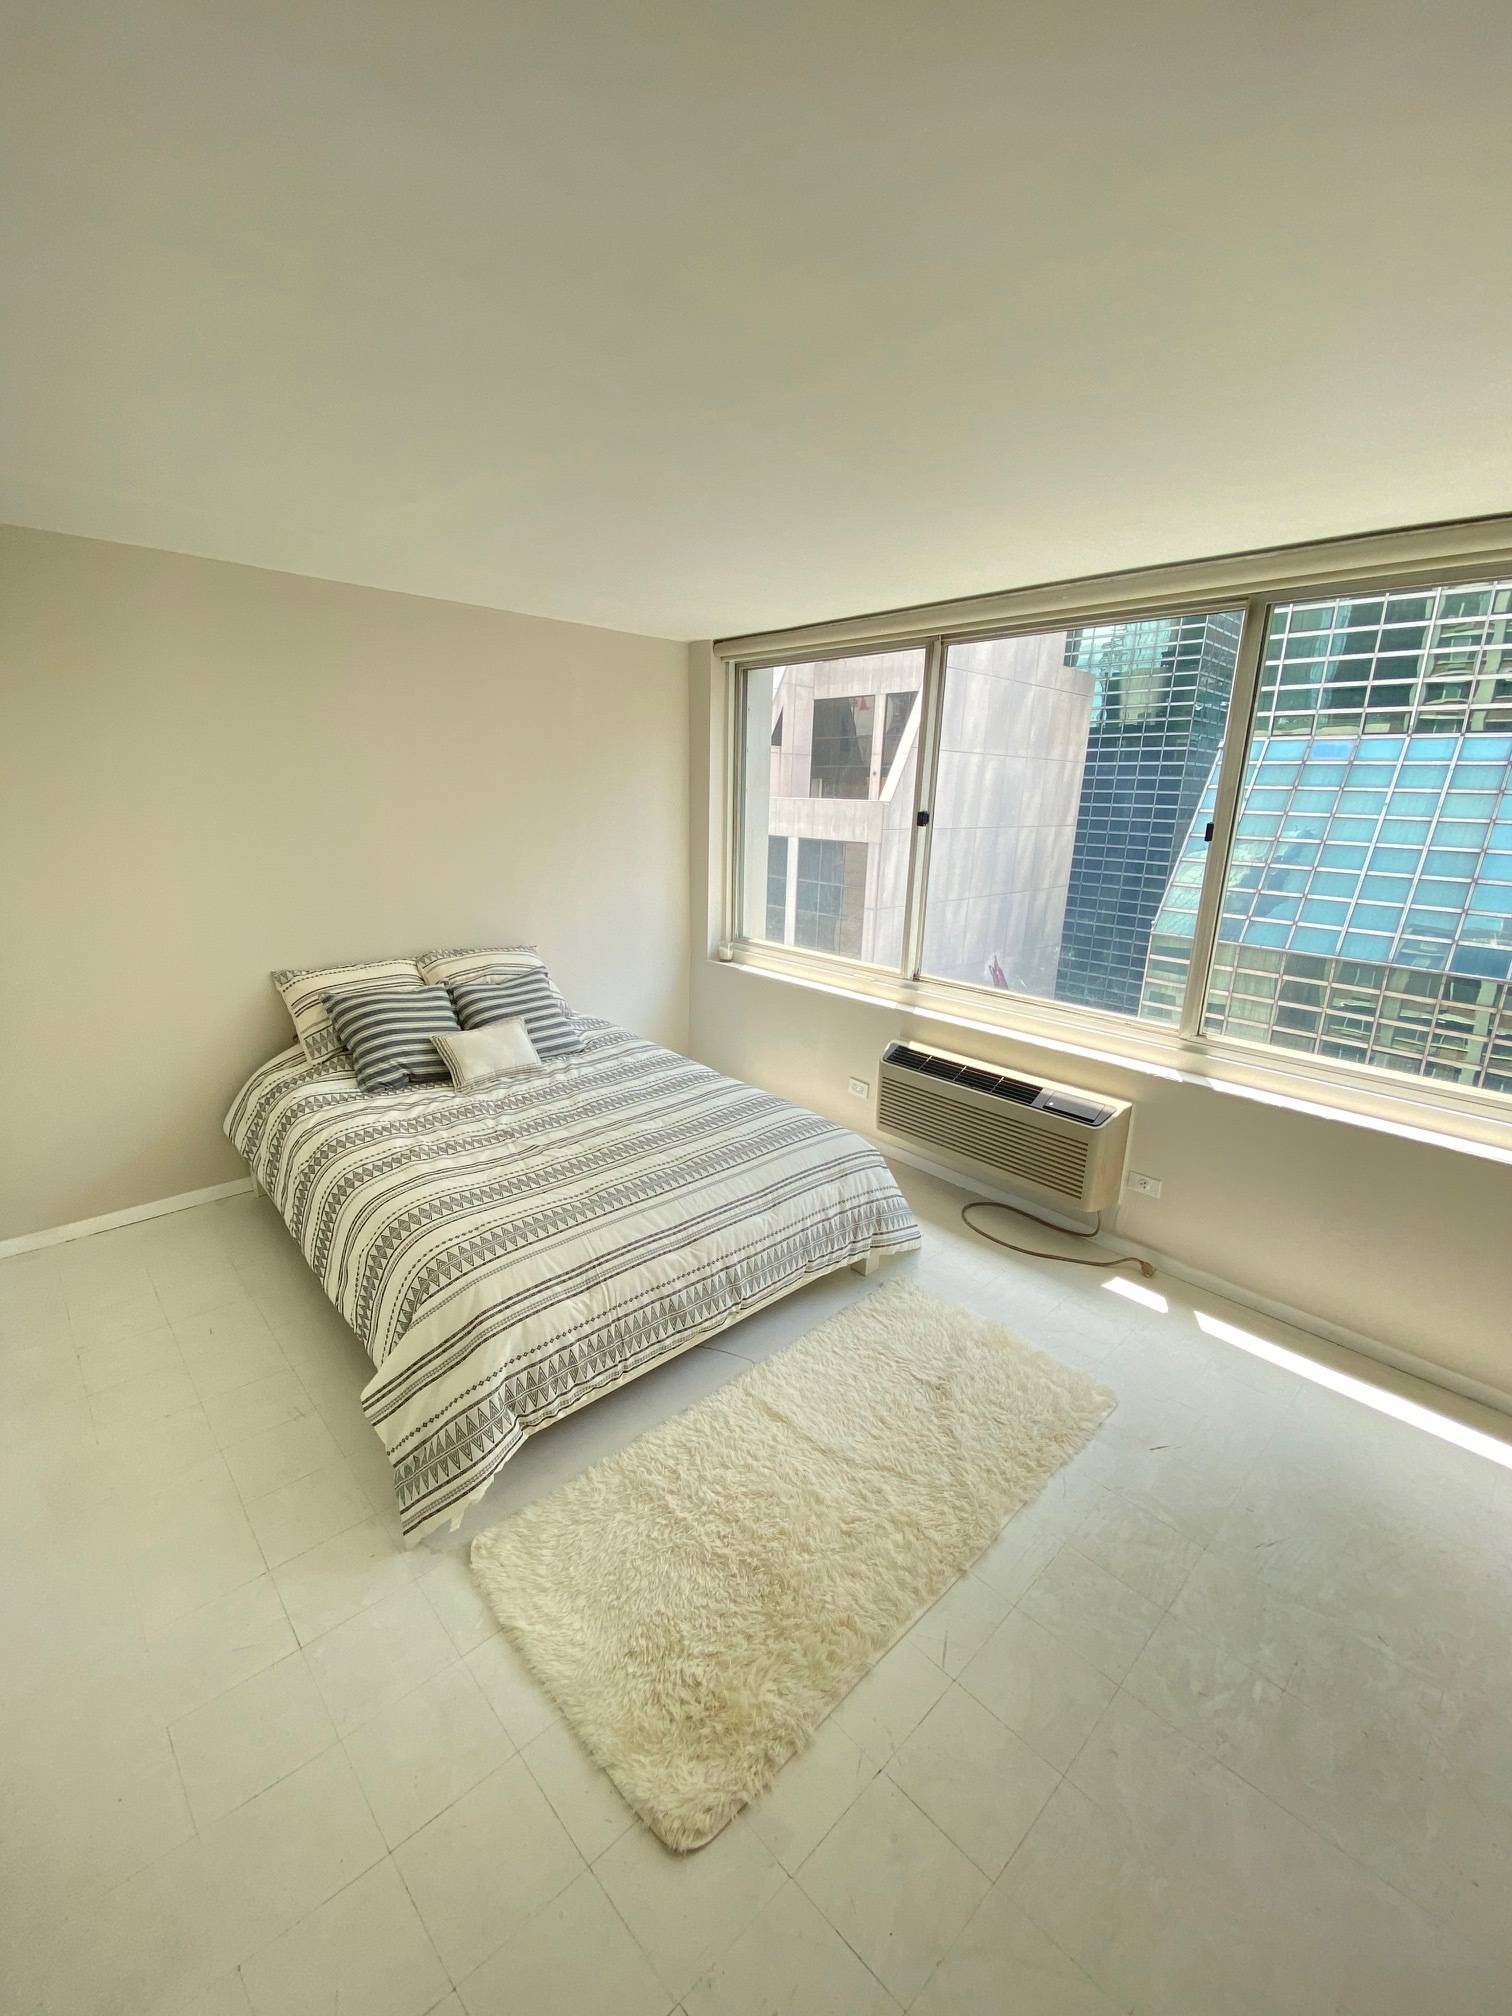 Unit 17A at 333 East 45th Street is a high floor one bedroom unit that provides an incredible opportunity to create your dream home in a coveted amenity condo building.